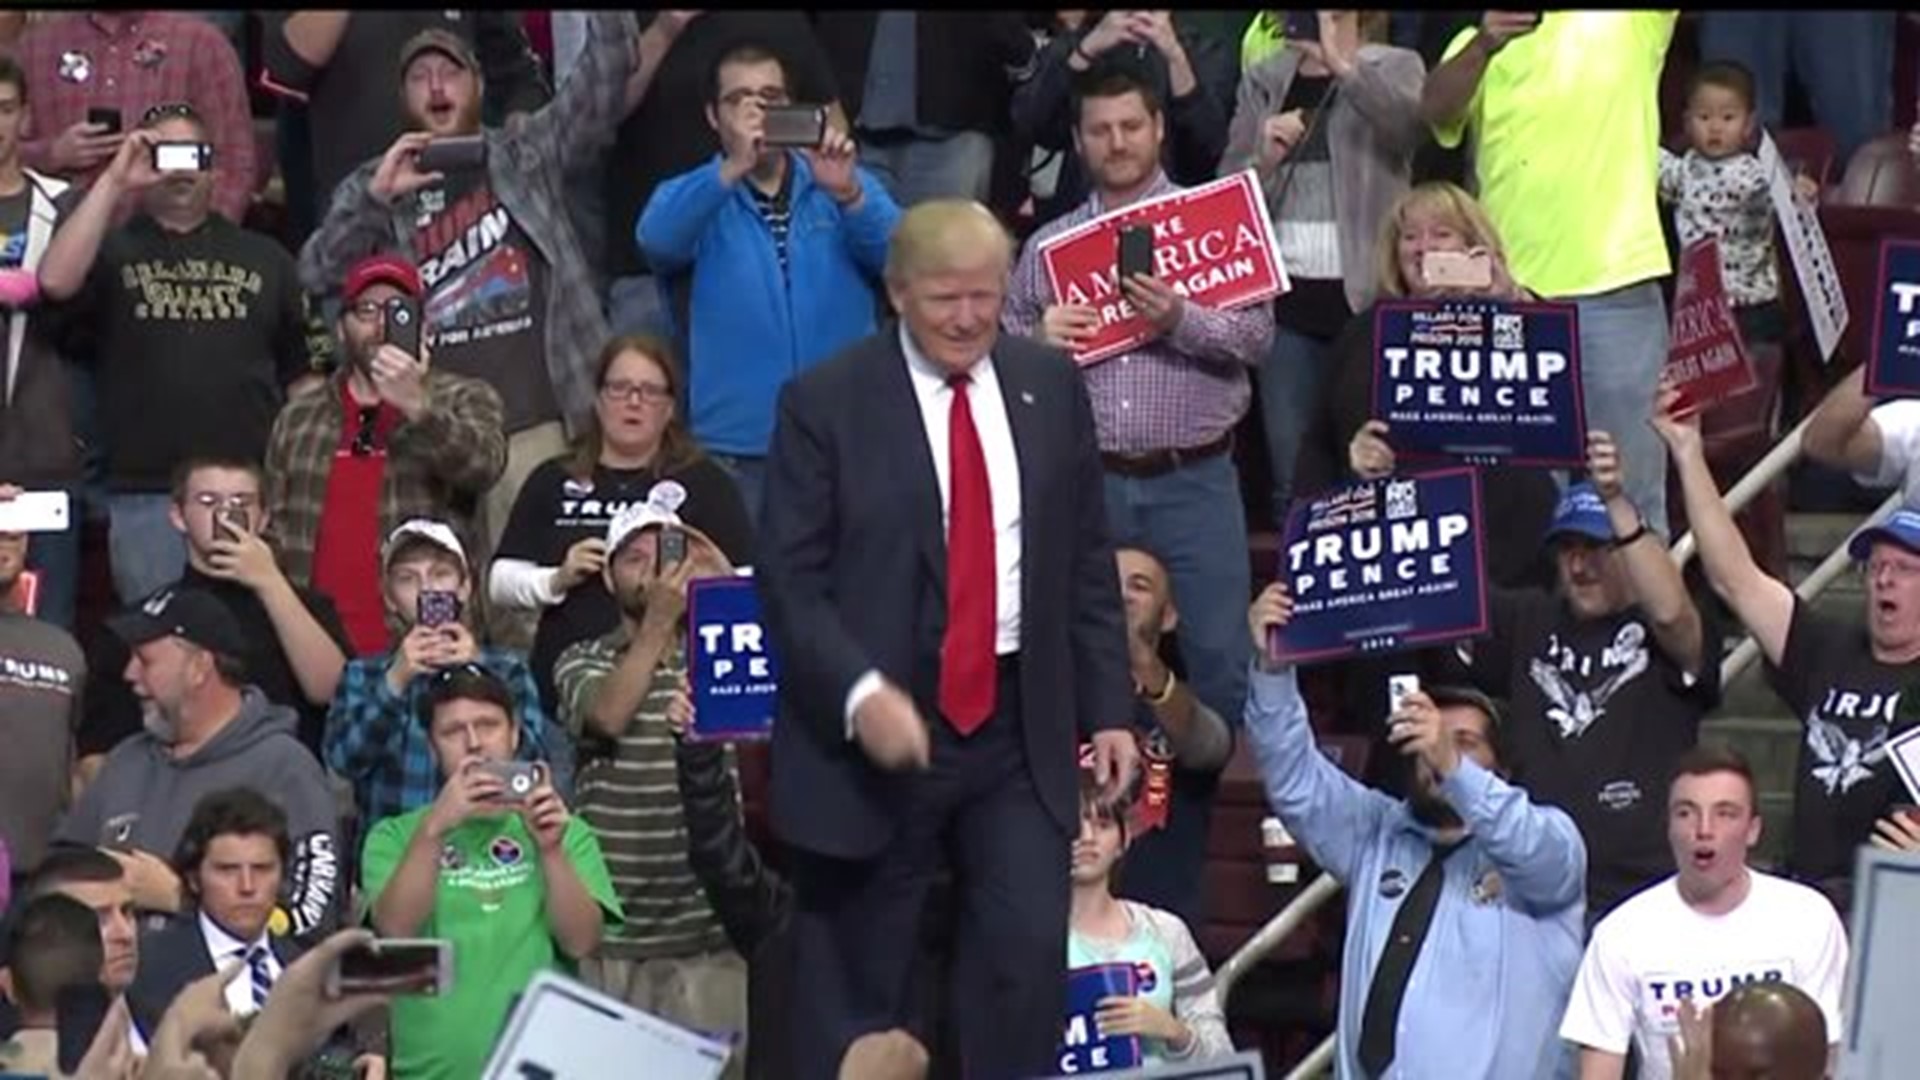 Trump makes one last campaign push in Hershey